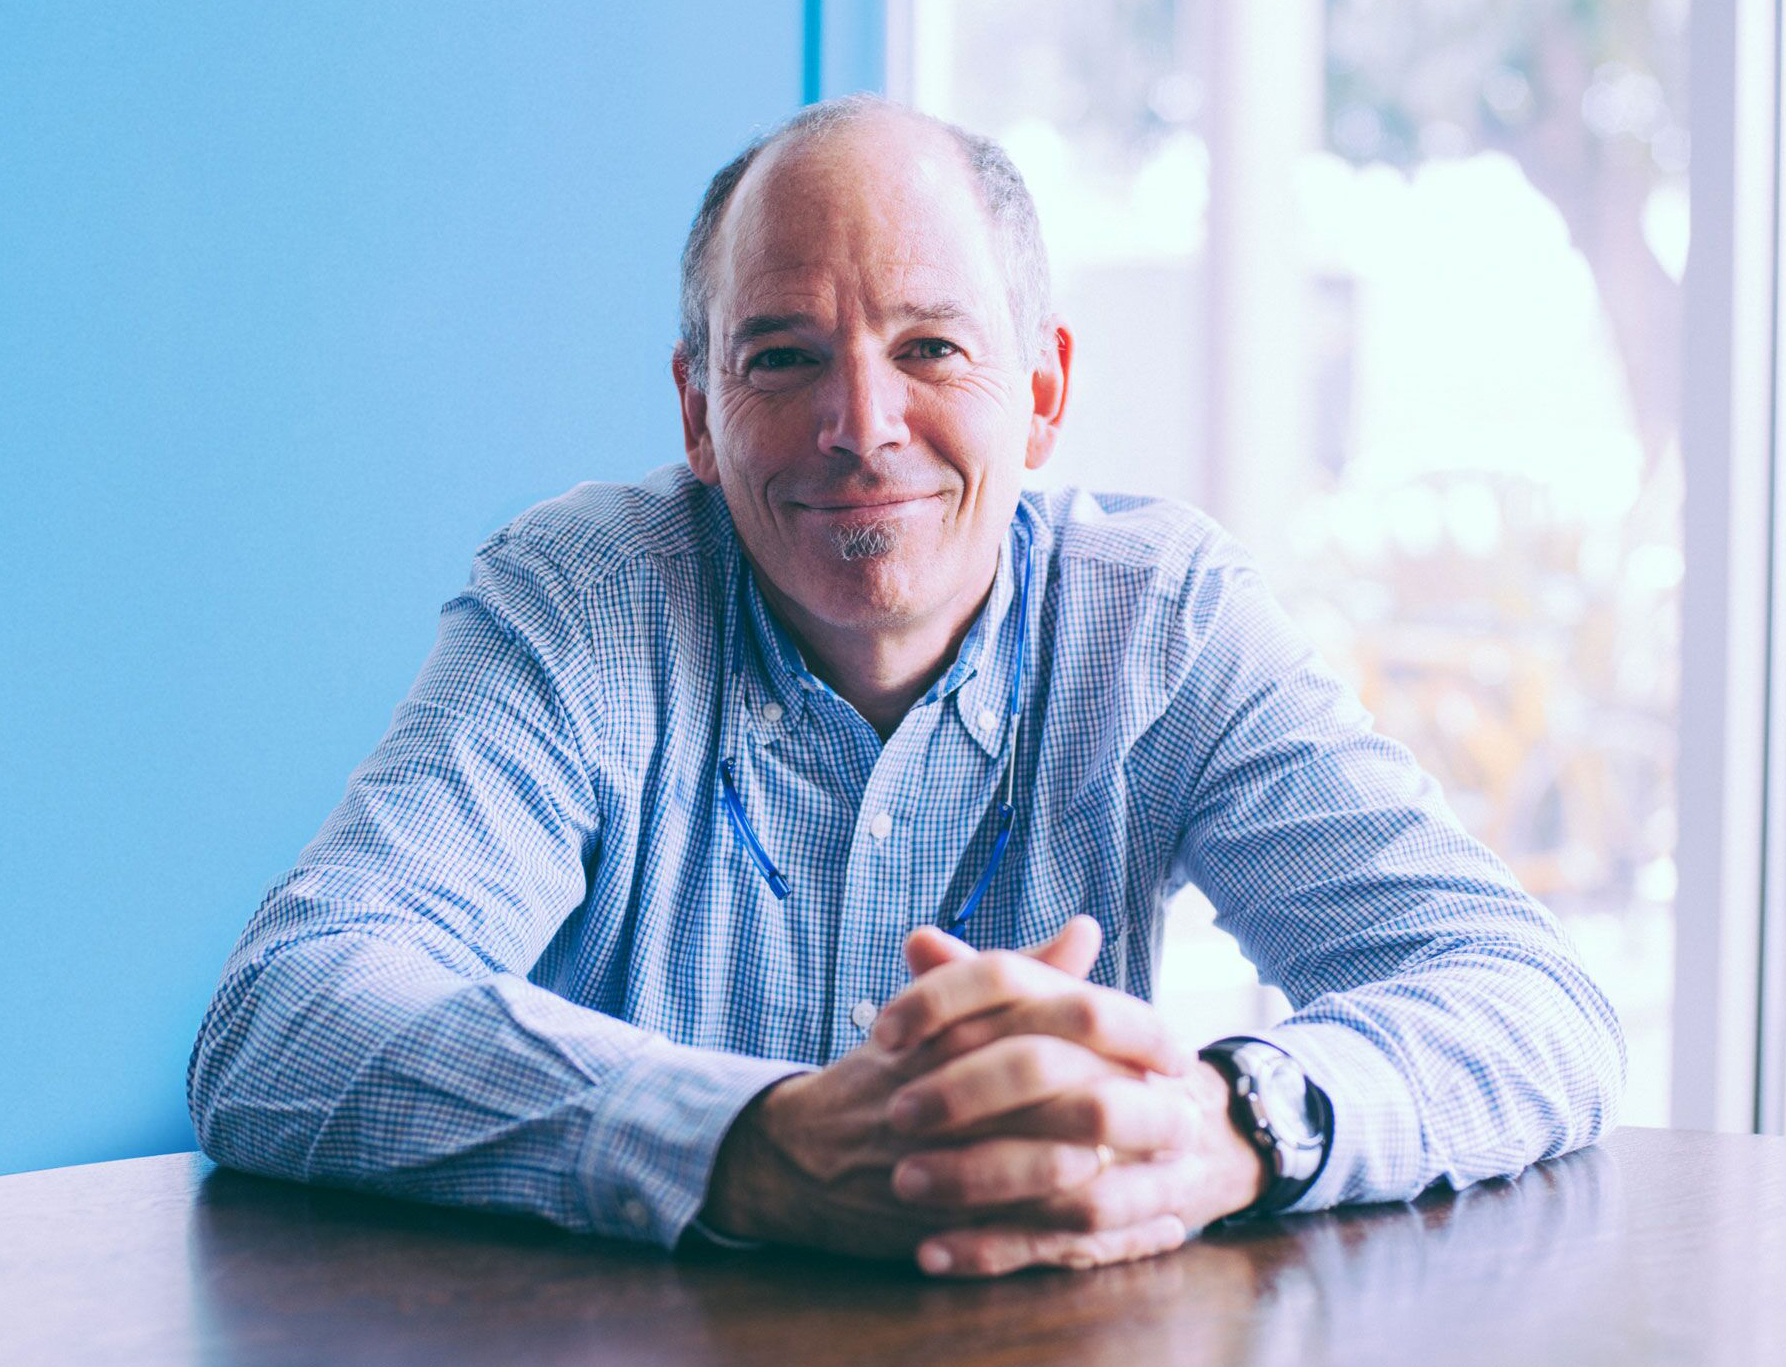 Netflix Co-Founder Marc Randolph Continues to Innovate